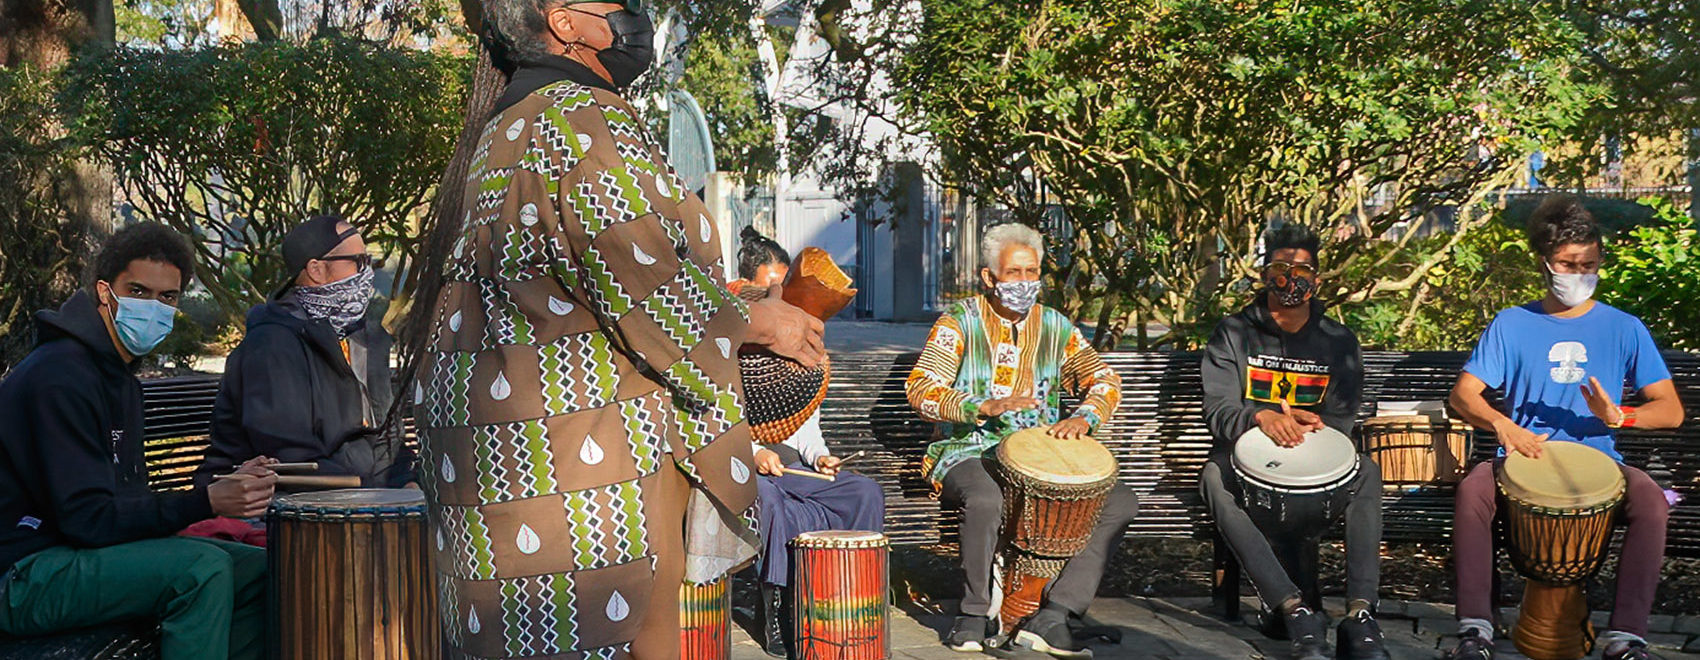 people sitting on bench playing congo drums in congo square in New Orleans